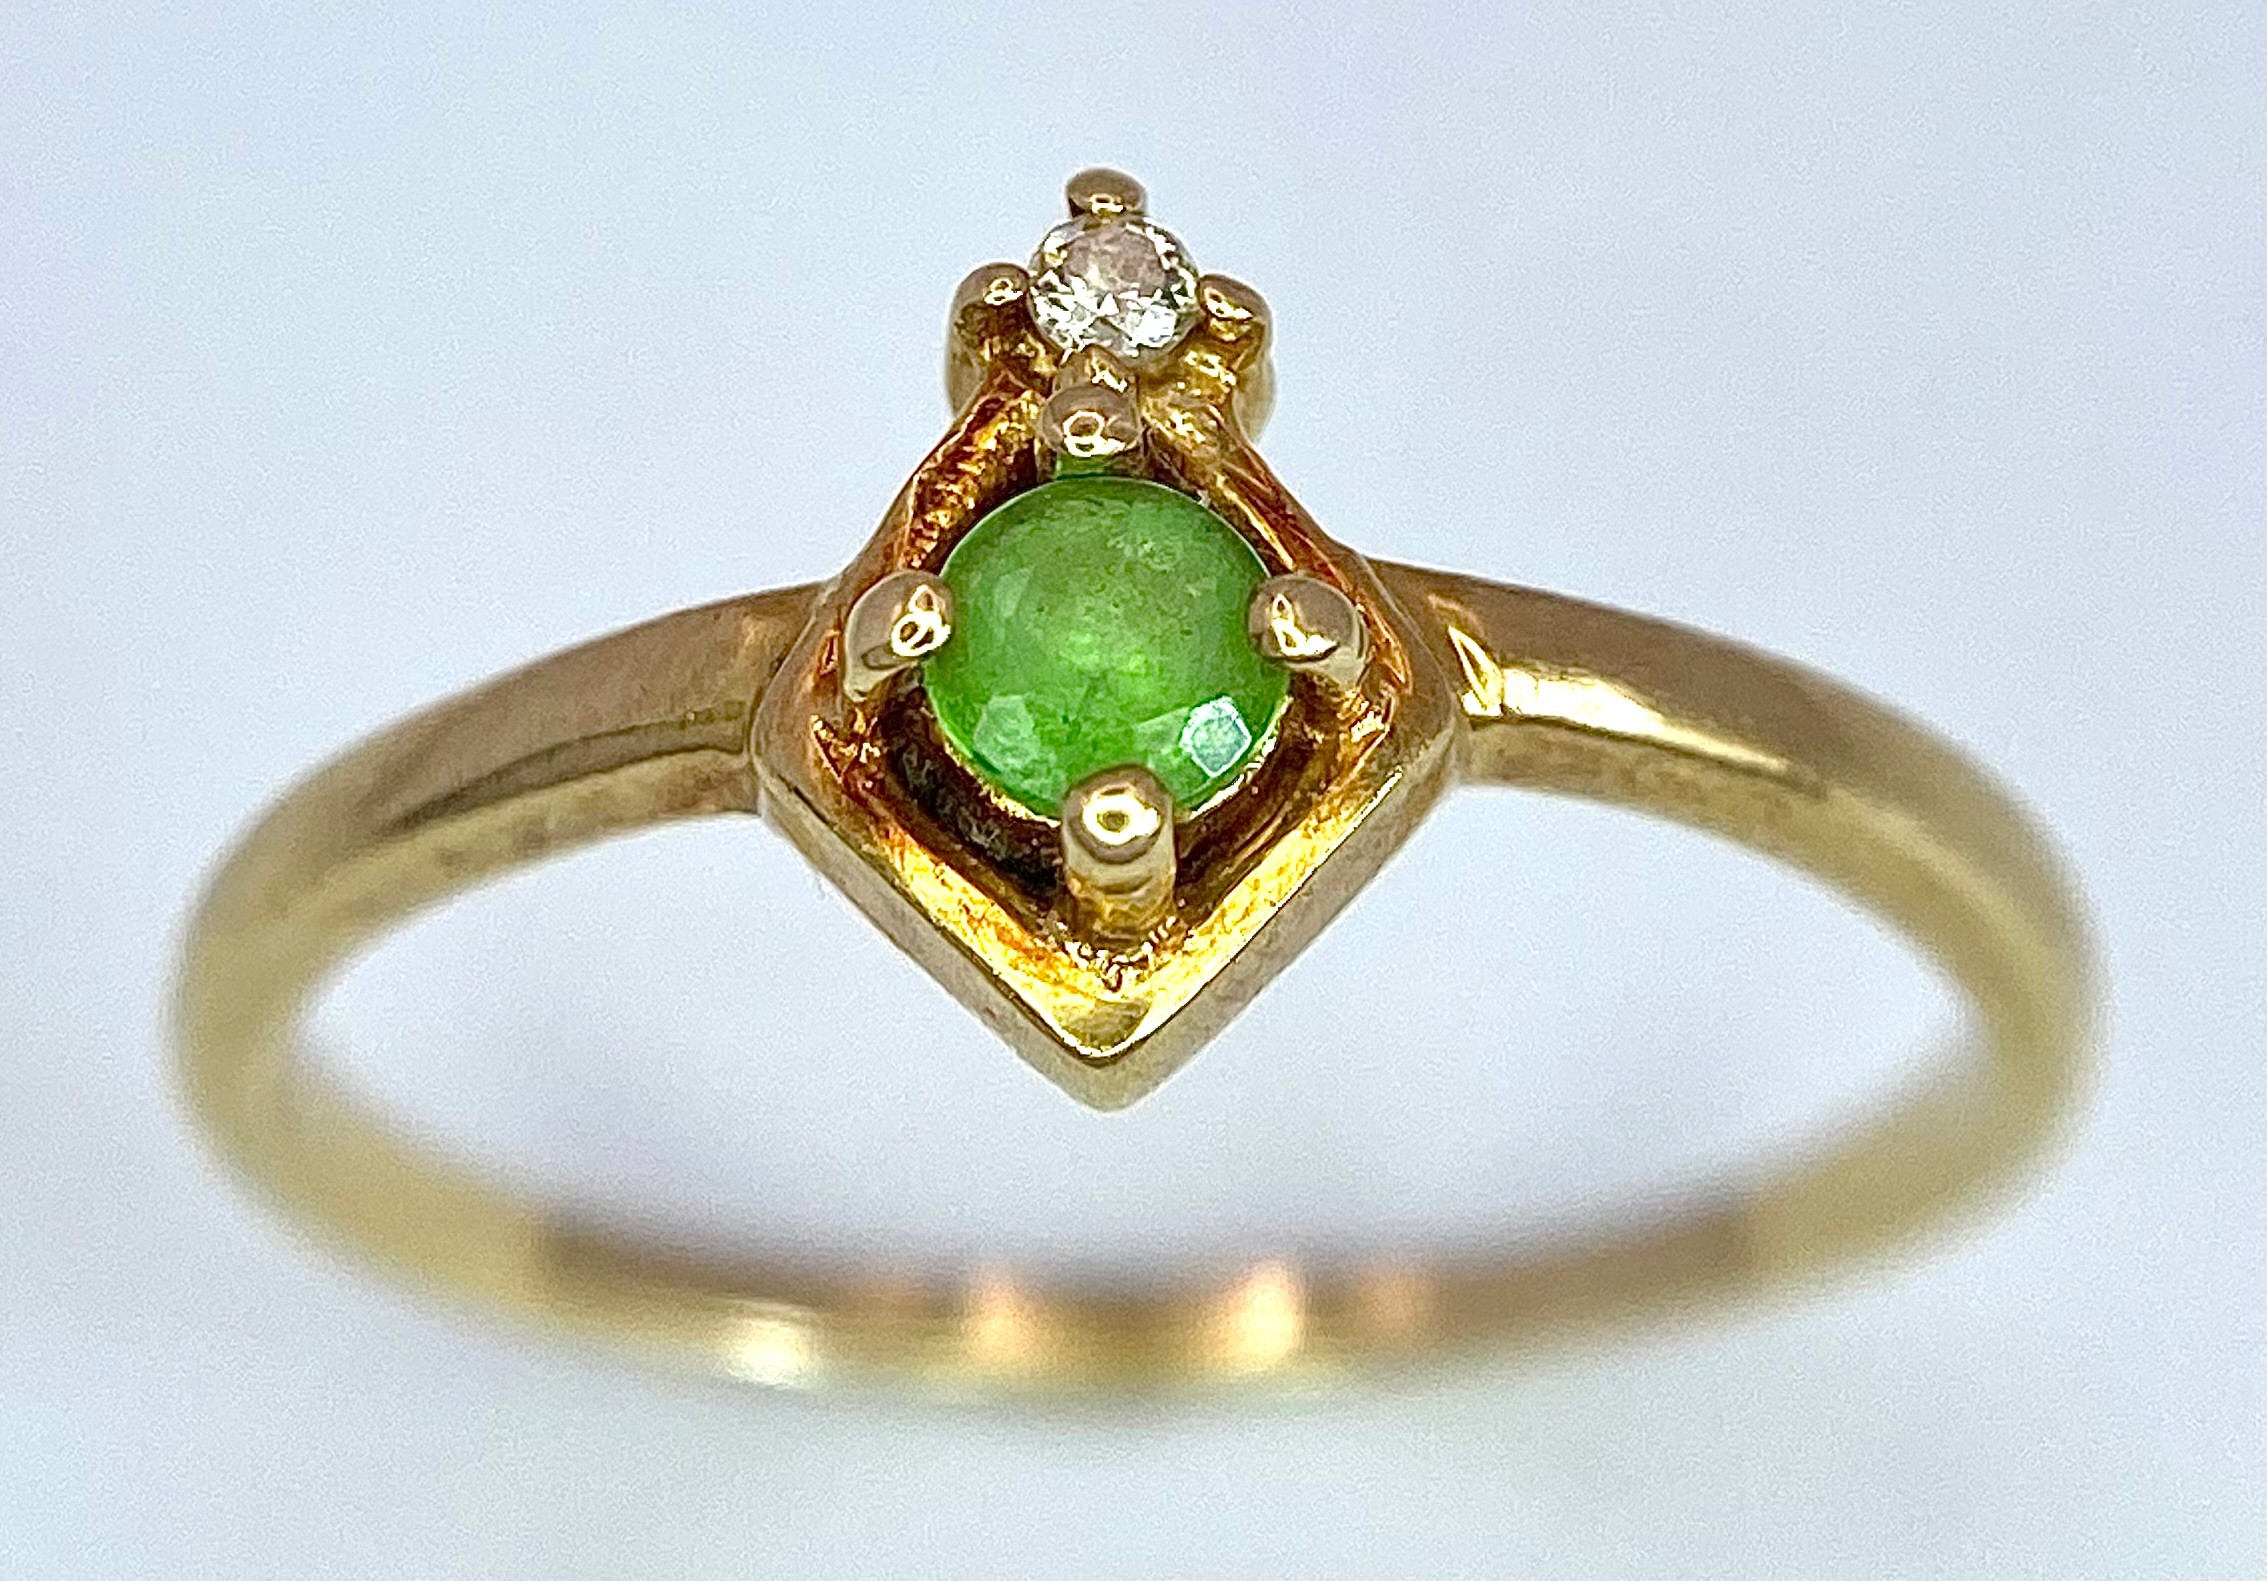 A14K YELLOW GOLD PERIDOT & DIAMOND RING. Size K/L, 1.4g total weight. Ref: SC 9030 - Image 2 of 6